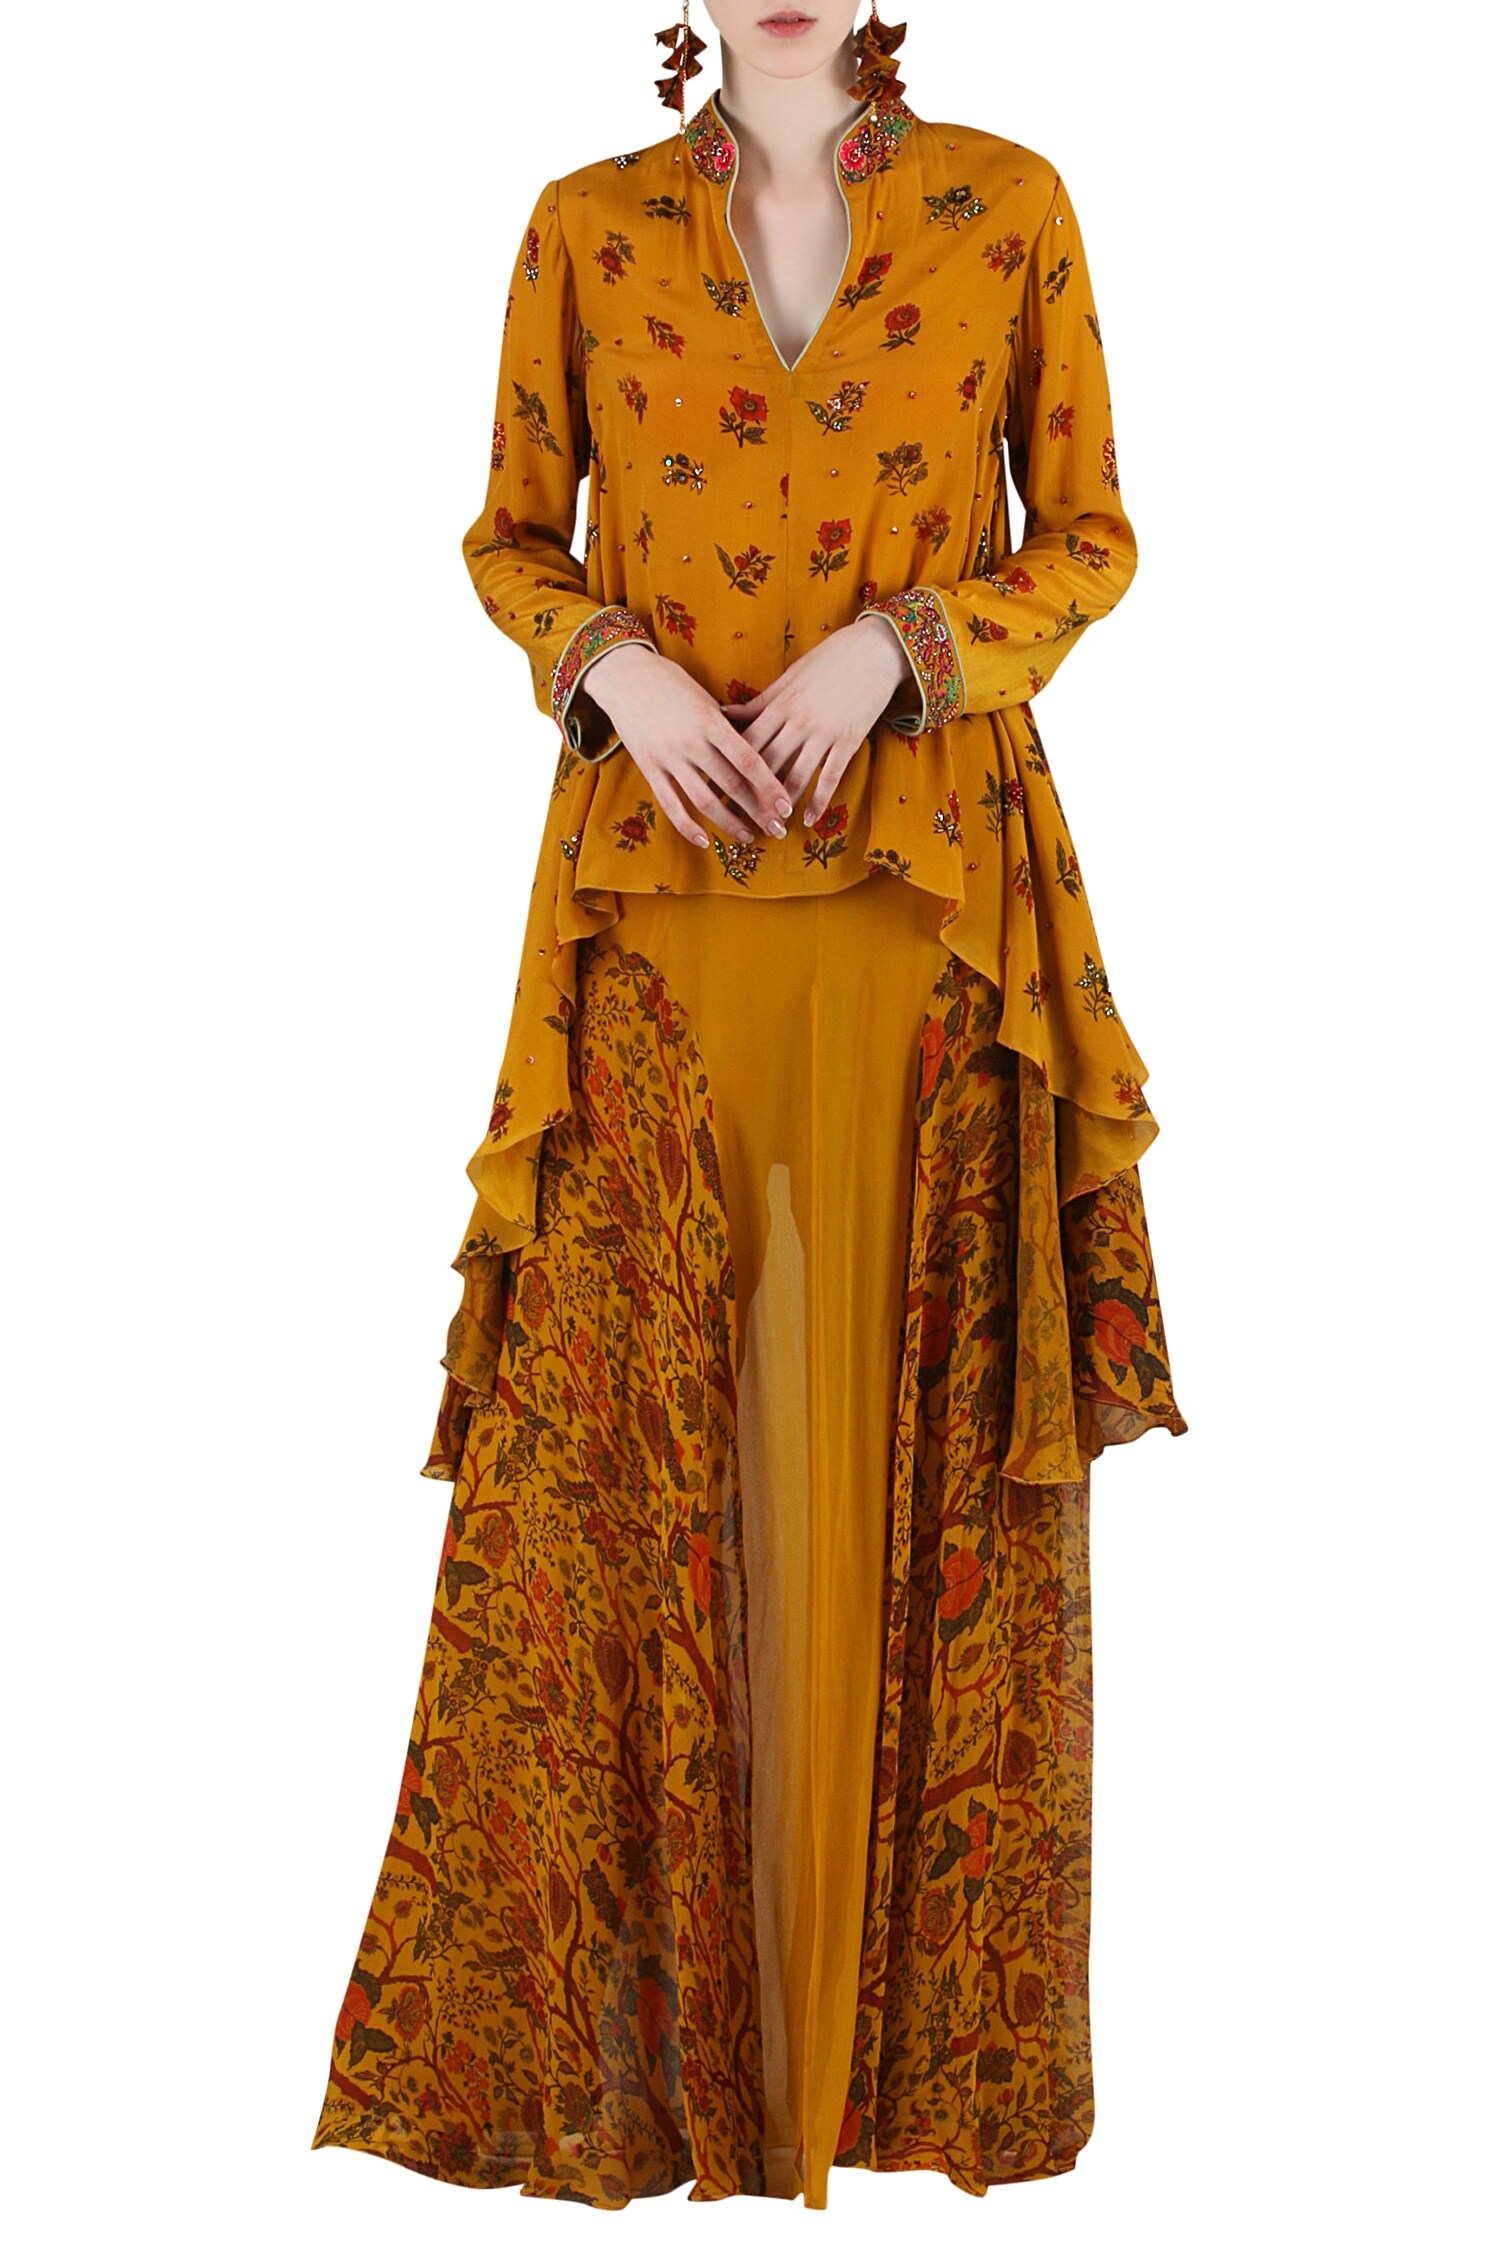 Nikasha Yellow Printed Floral Motifs V Neck Top And Flared Skirt Set For Women